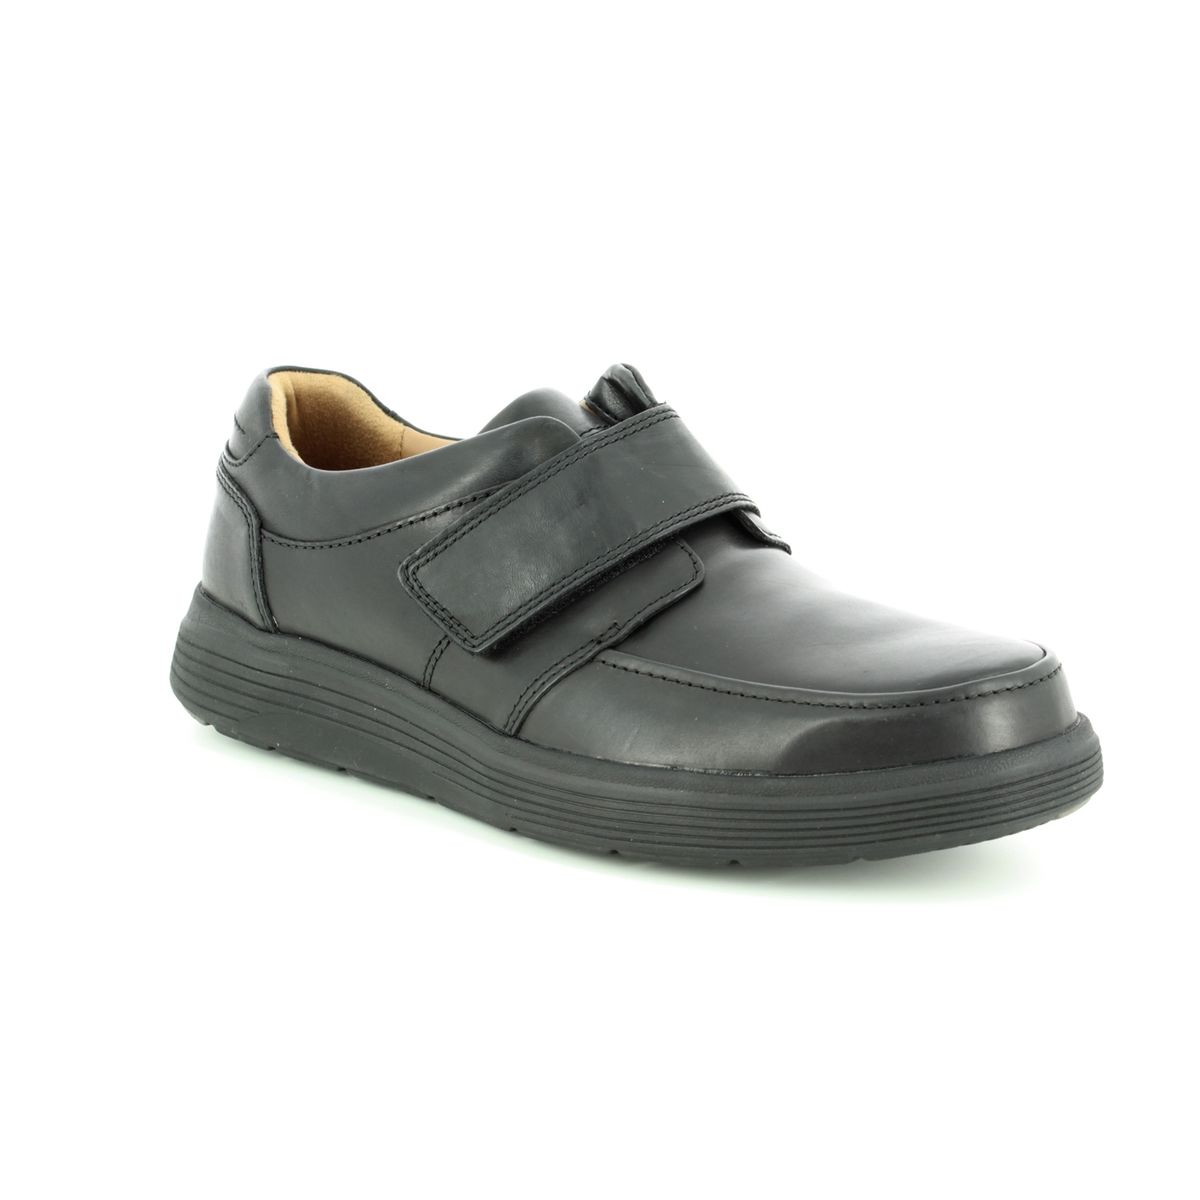 Clarks Un Abode Strap Black Leather Mens Comfort Shoes 3698-68H In Size 9 In Plain Black Leather H Width Fitting Extra Wide